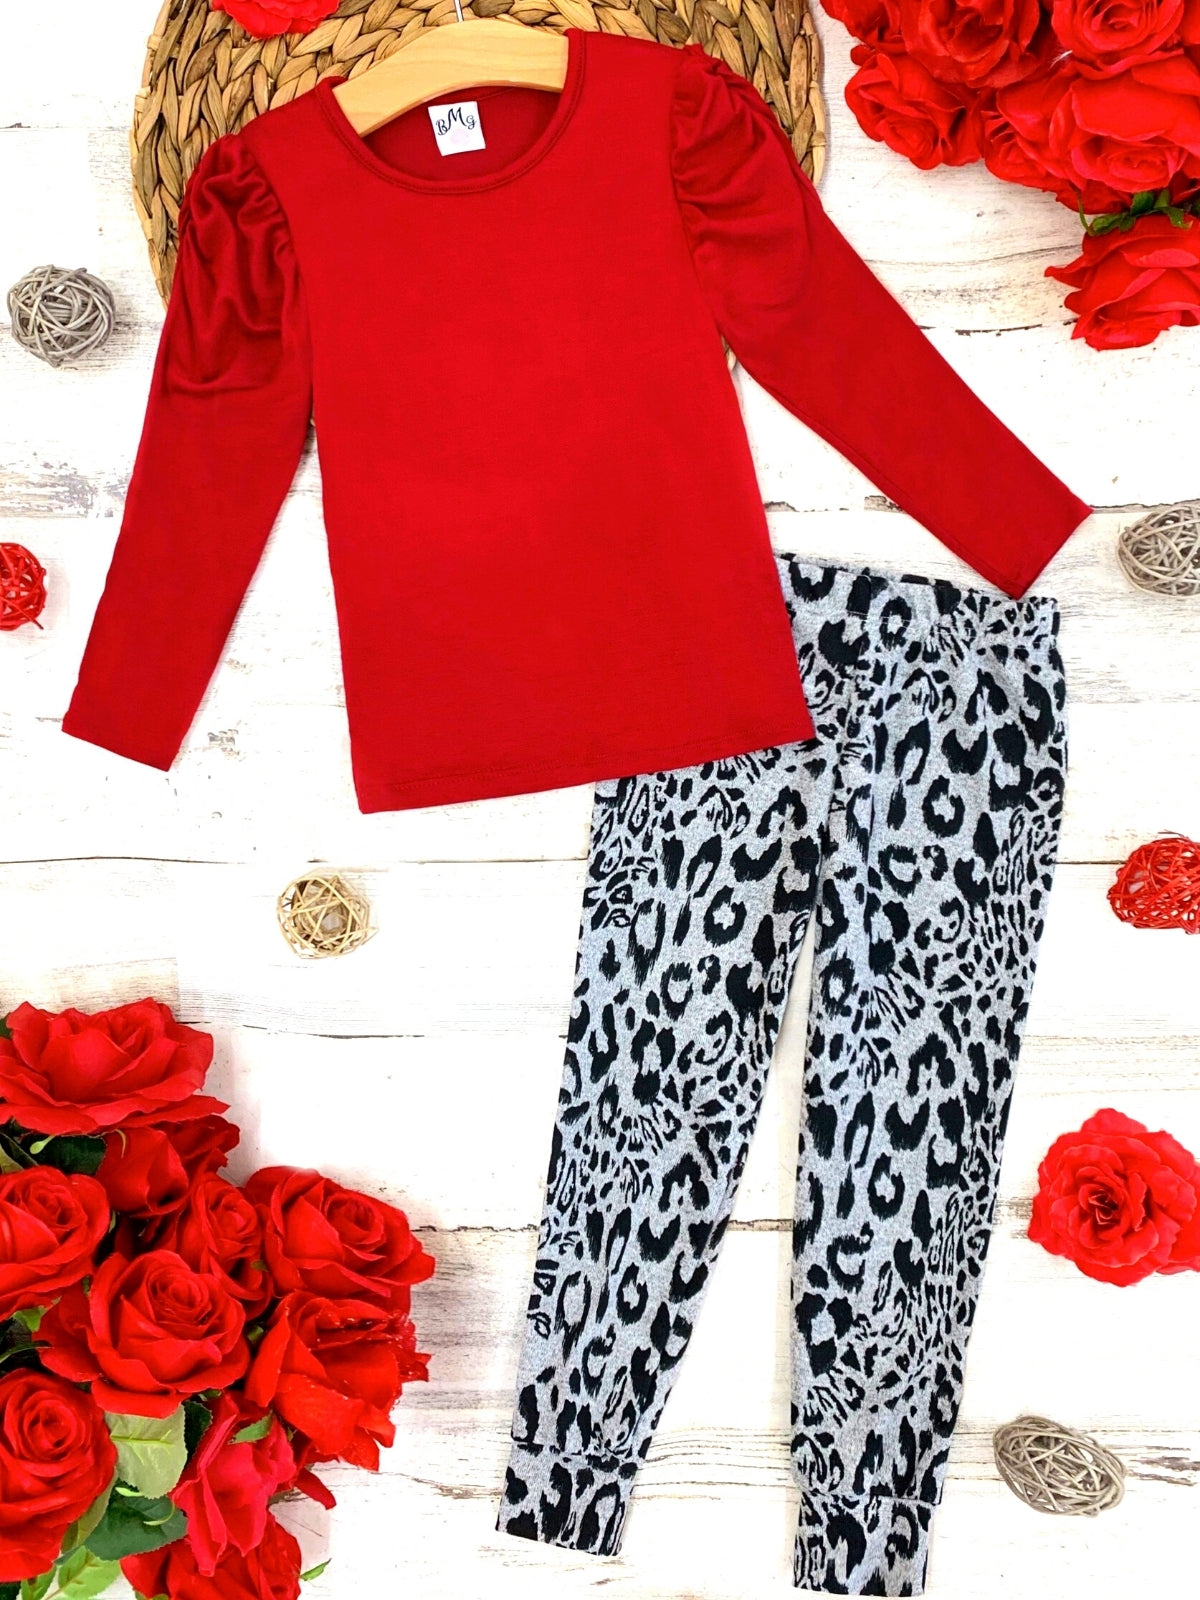 Fall Outfits | Capped Sleeve Top & Leopard Print Jogger Pants Set 